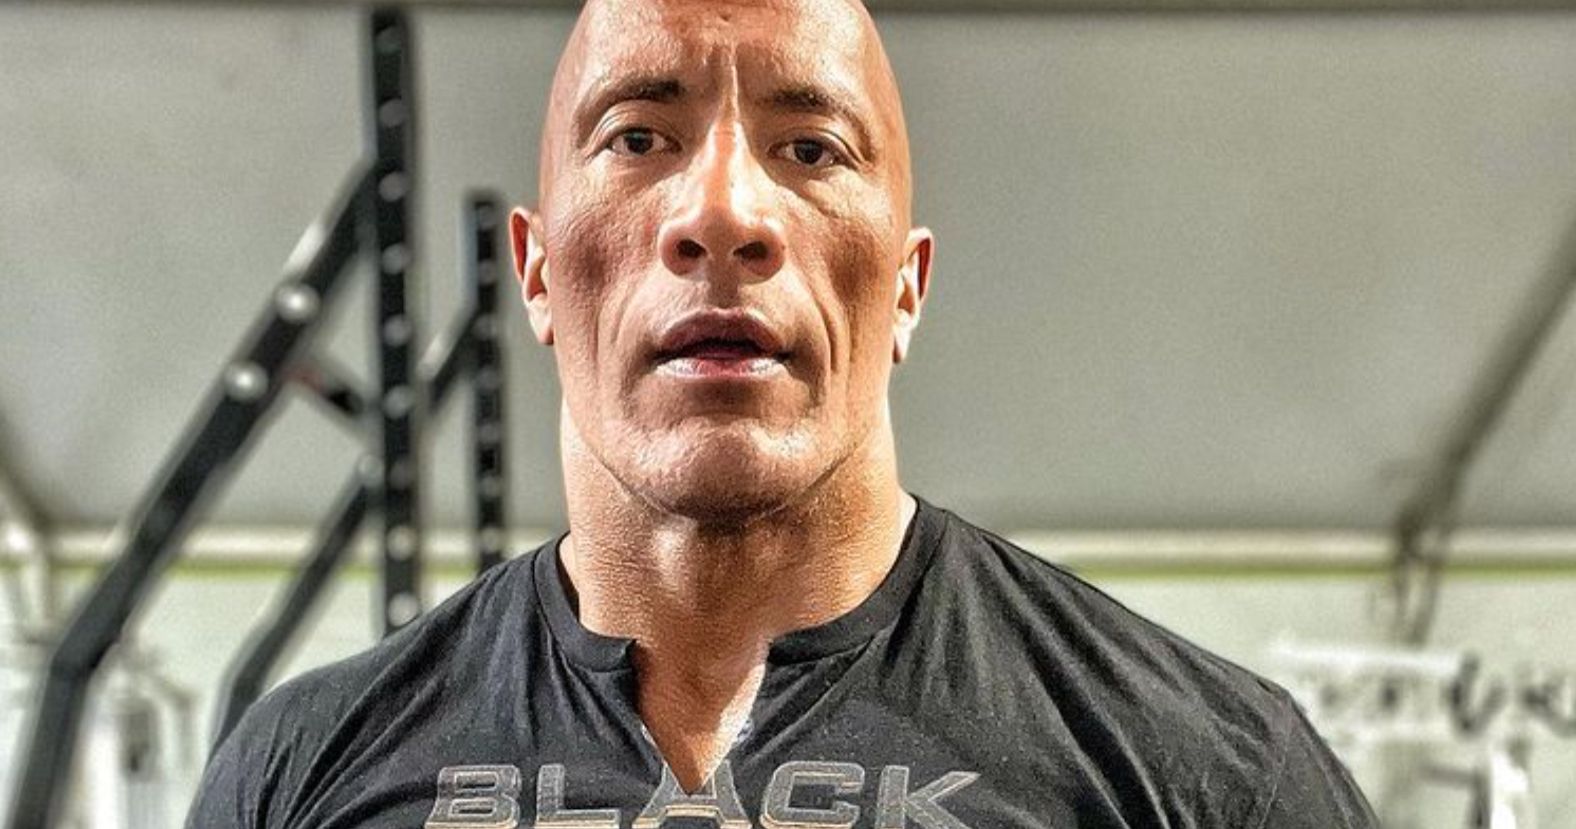 The Rock Begins Phase 2 of His Black Adam Training